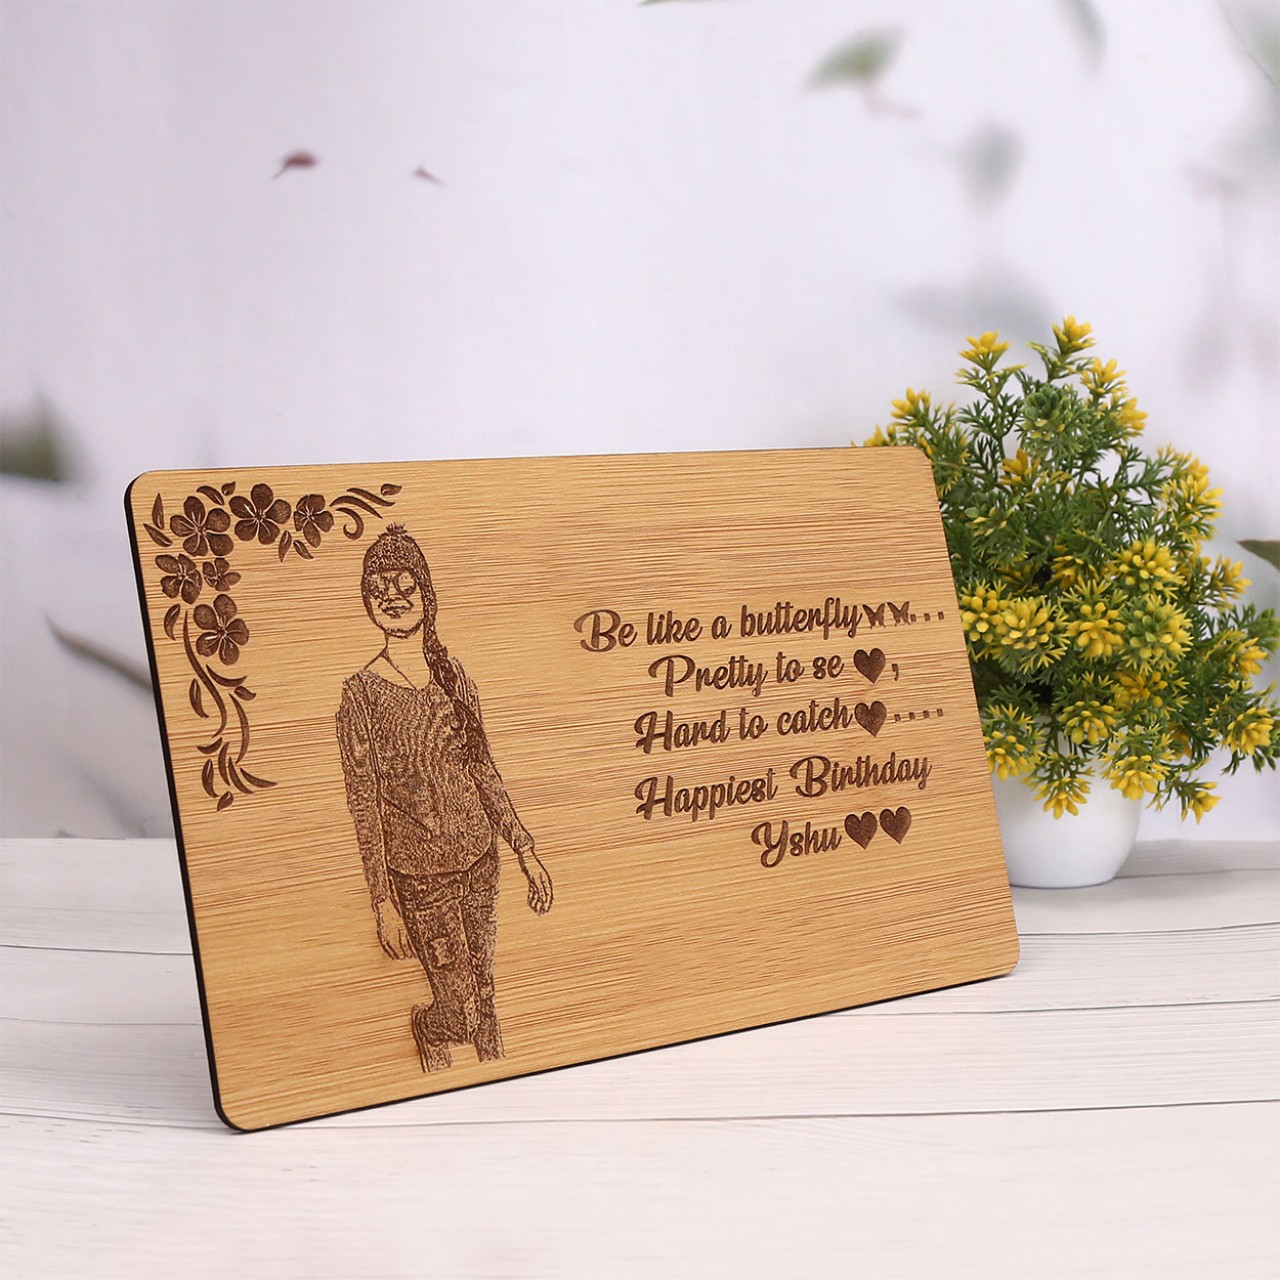 Personalized Wooden Birthday Table Frame